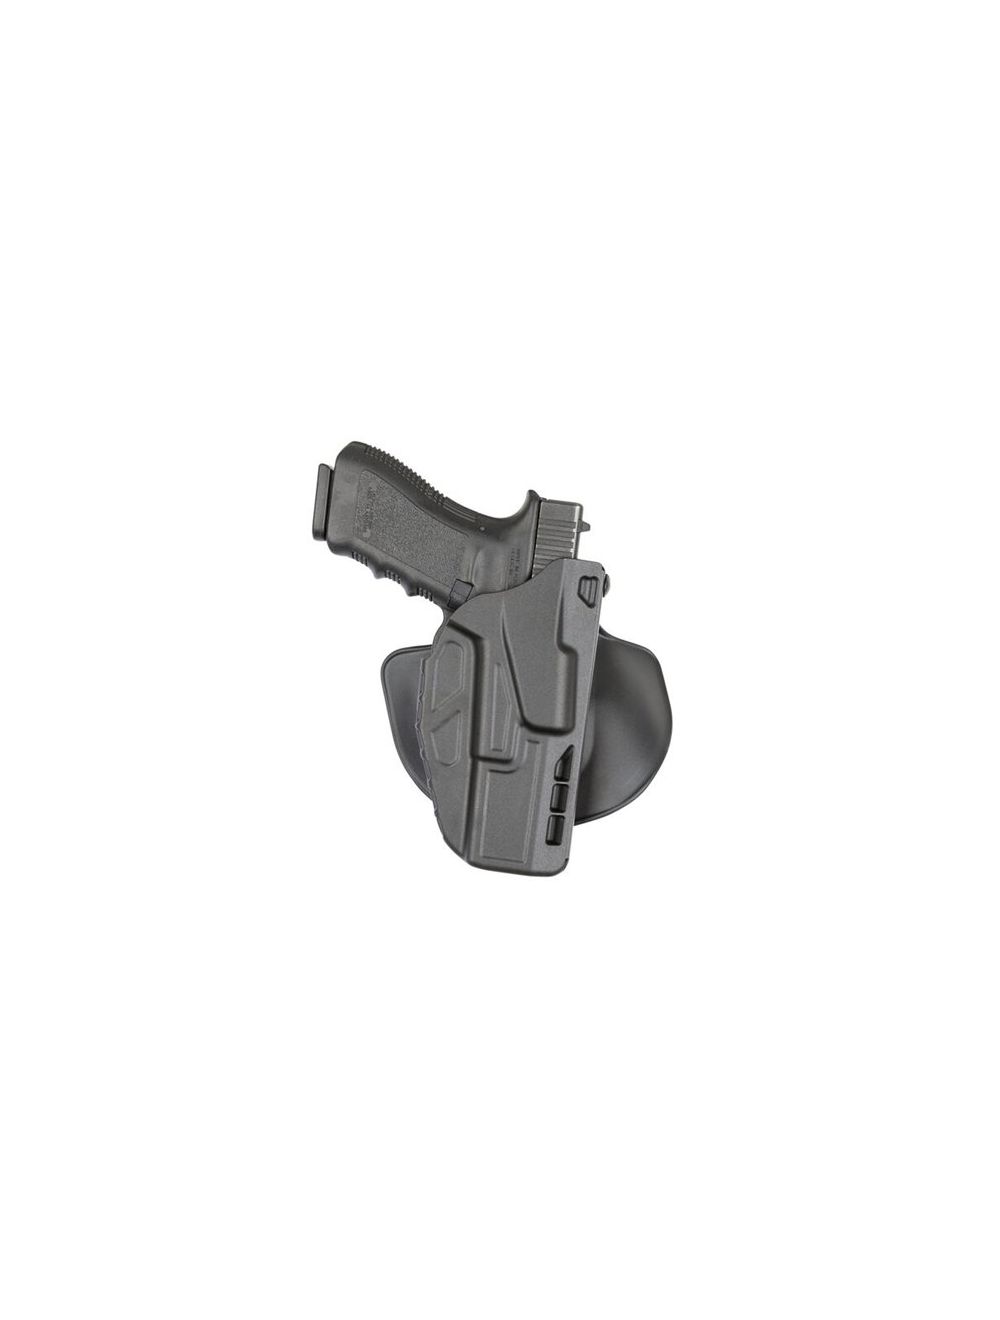 Model 7378 7TS ALS Concealment Paddle and Belt Loop Combo Holster for Glock 17 w/ Compact Light